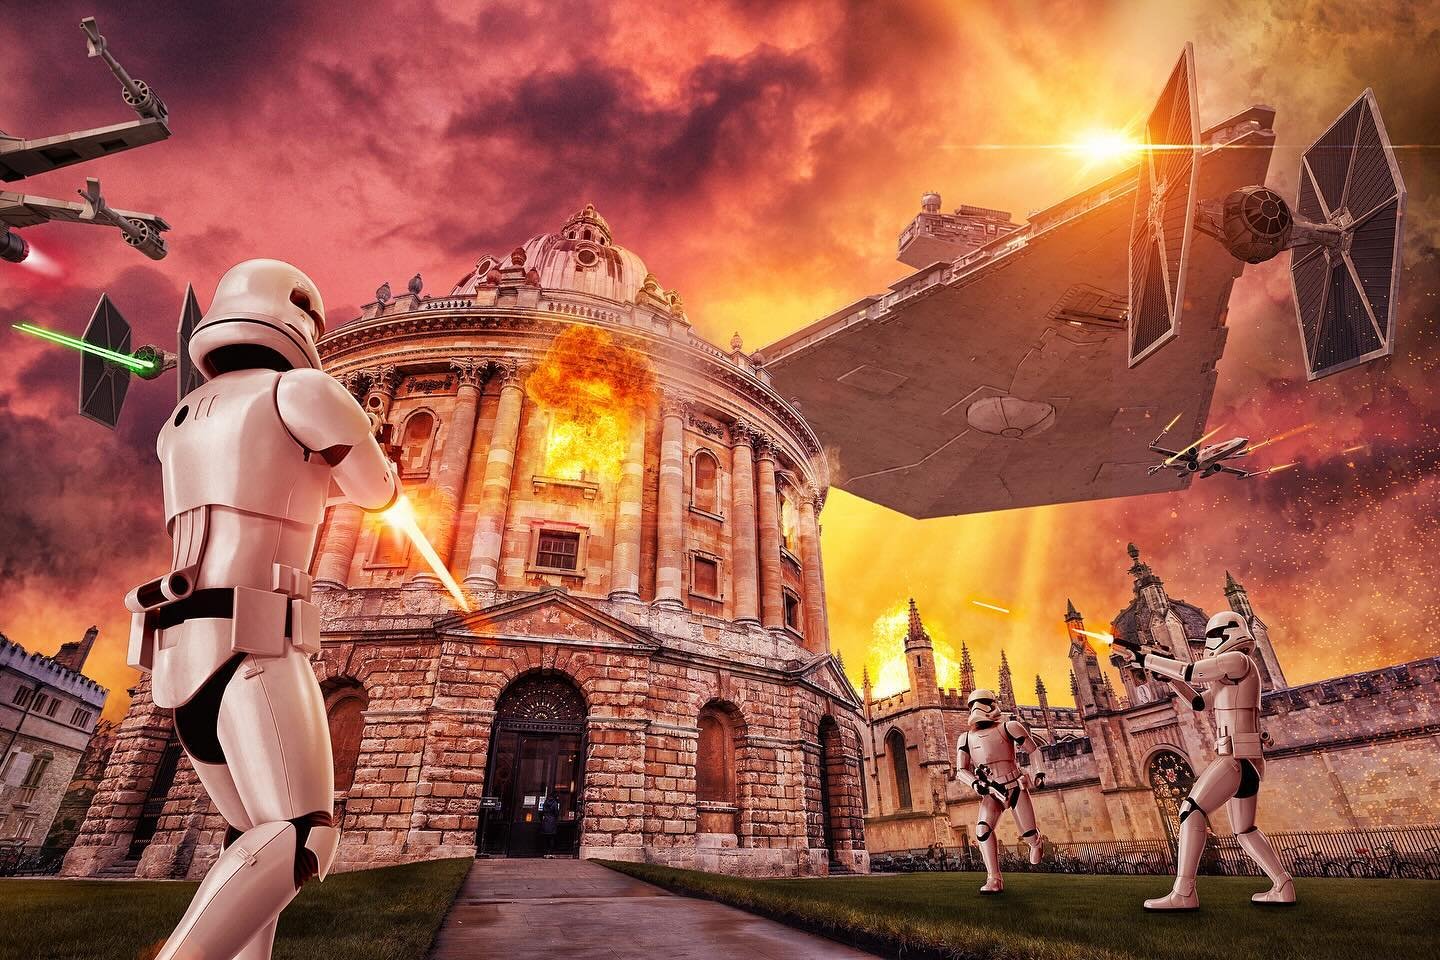 May the 4th be with you, with these old pics and vids from the archive! 1) Composite test, Oxford. 2) A mate and I visited a Star Wars exhibition. All these years later and I was an extra on Andor - best job ever! 3) Promo pic for the wonderful @ians